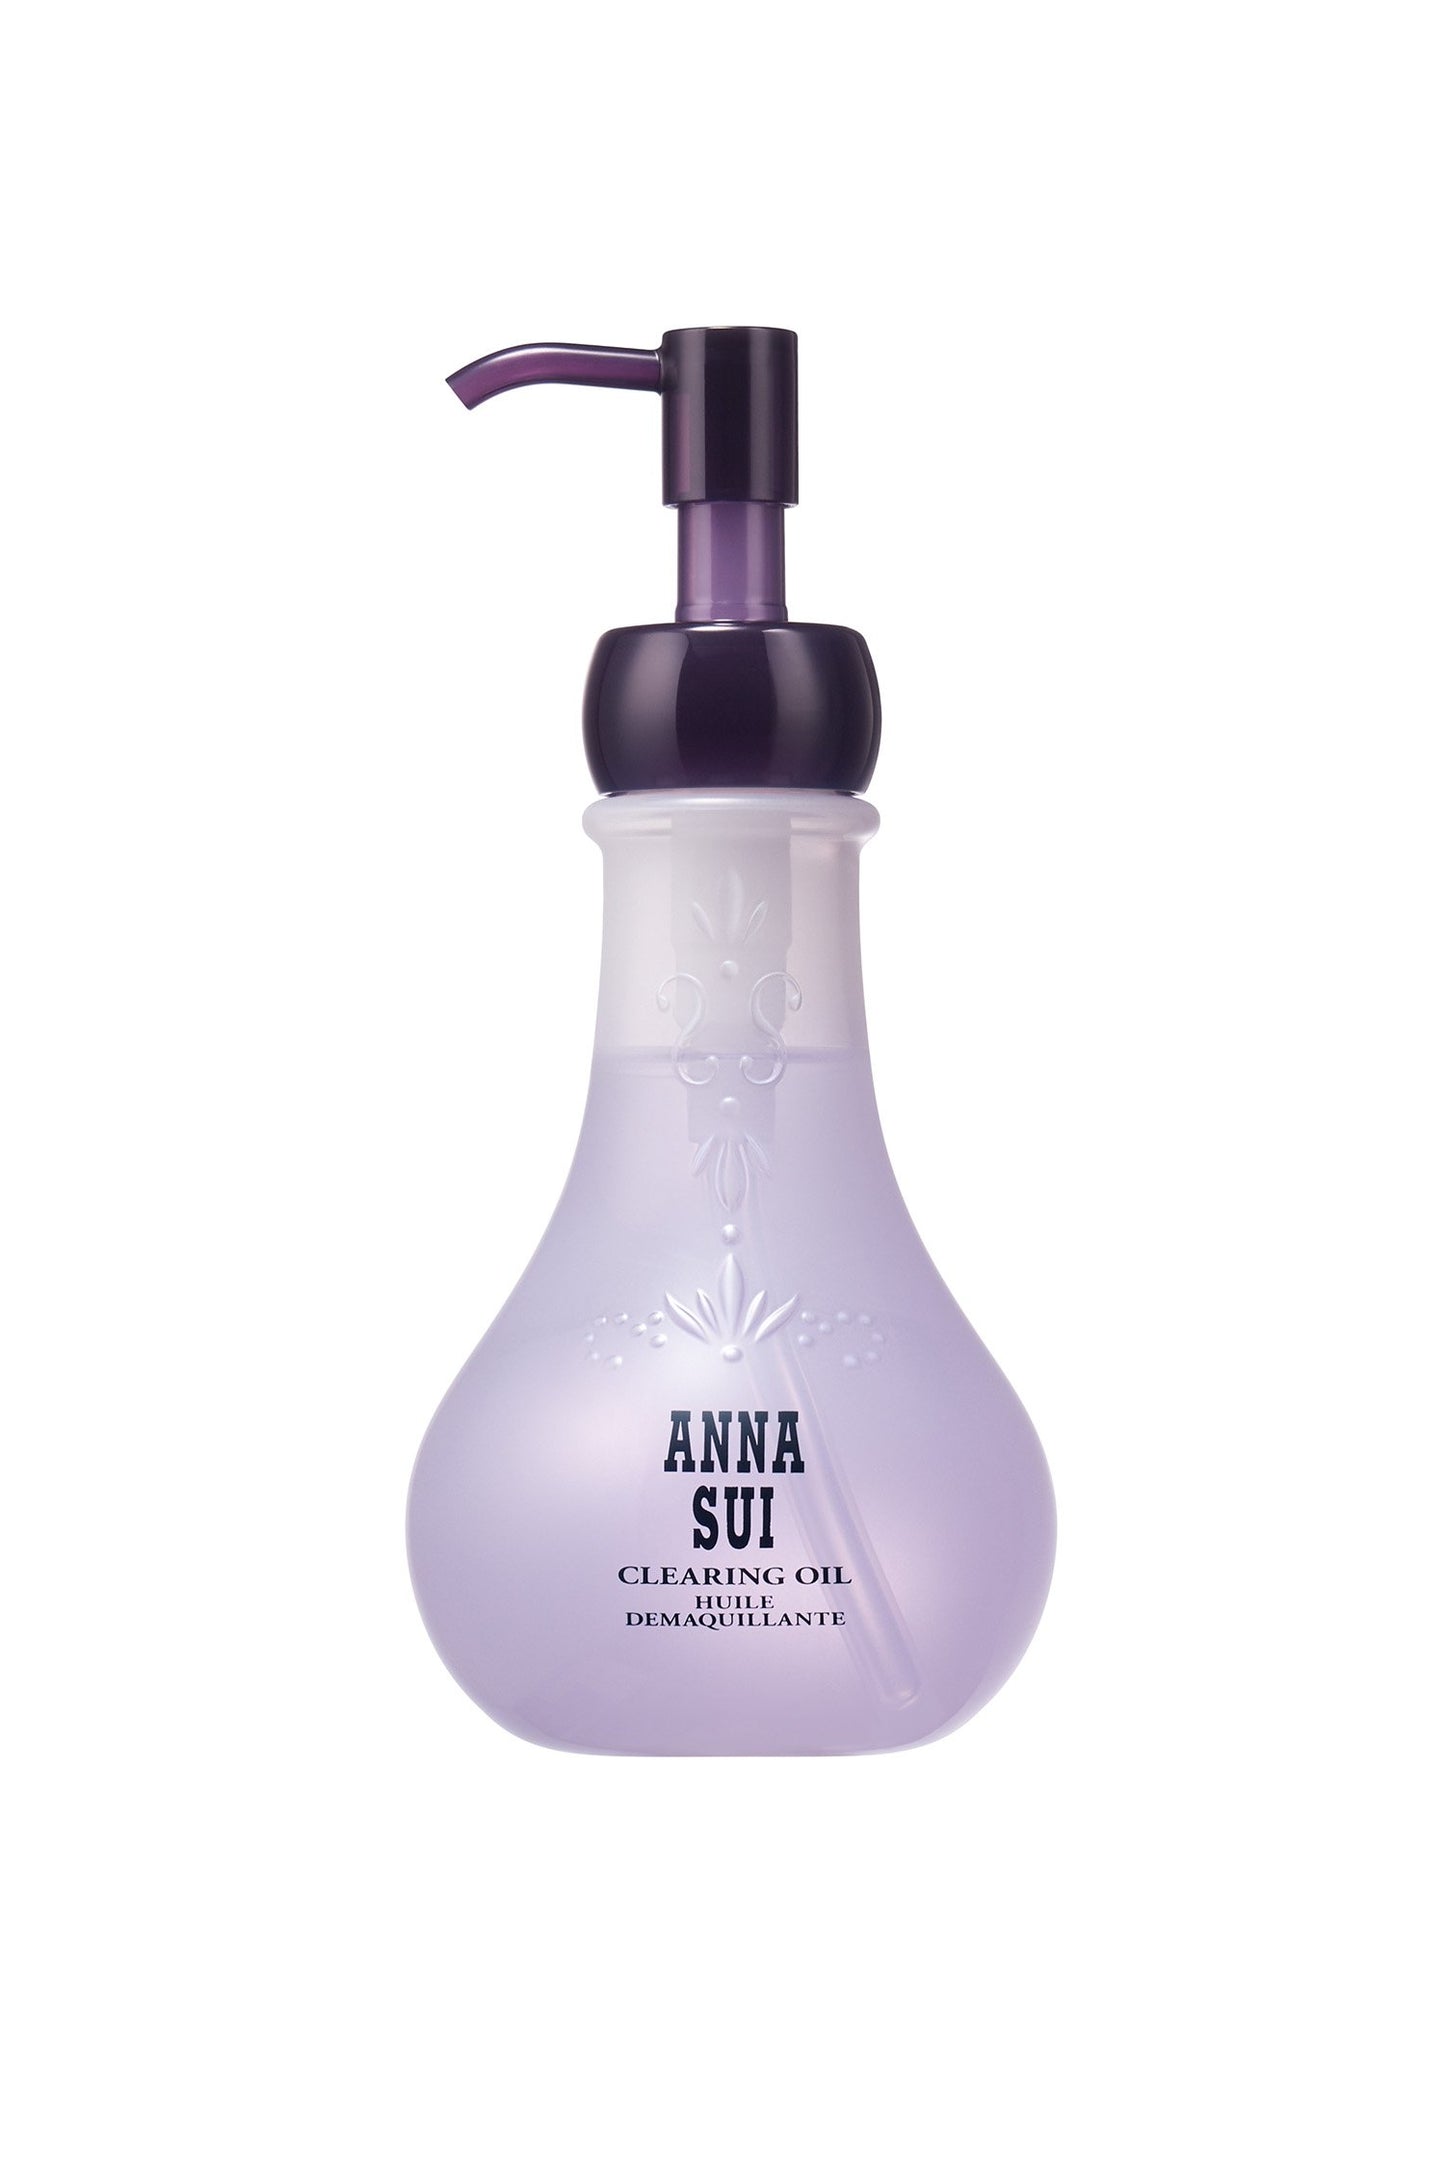 Clearing Oil: in a violet, bulb-shaped container, floral design & Anna branding, purple dispenser